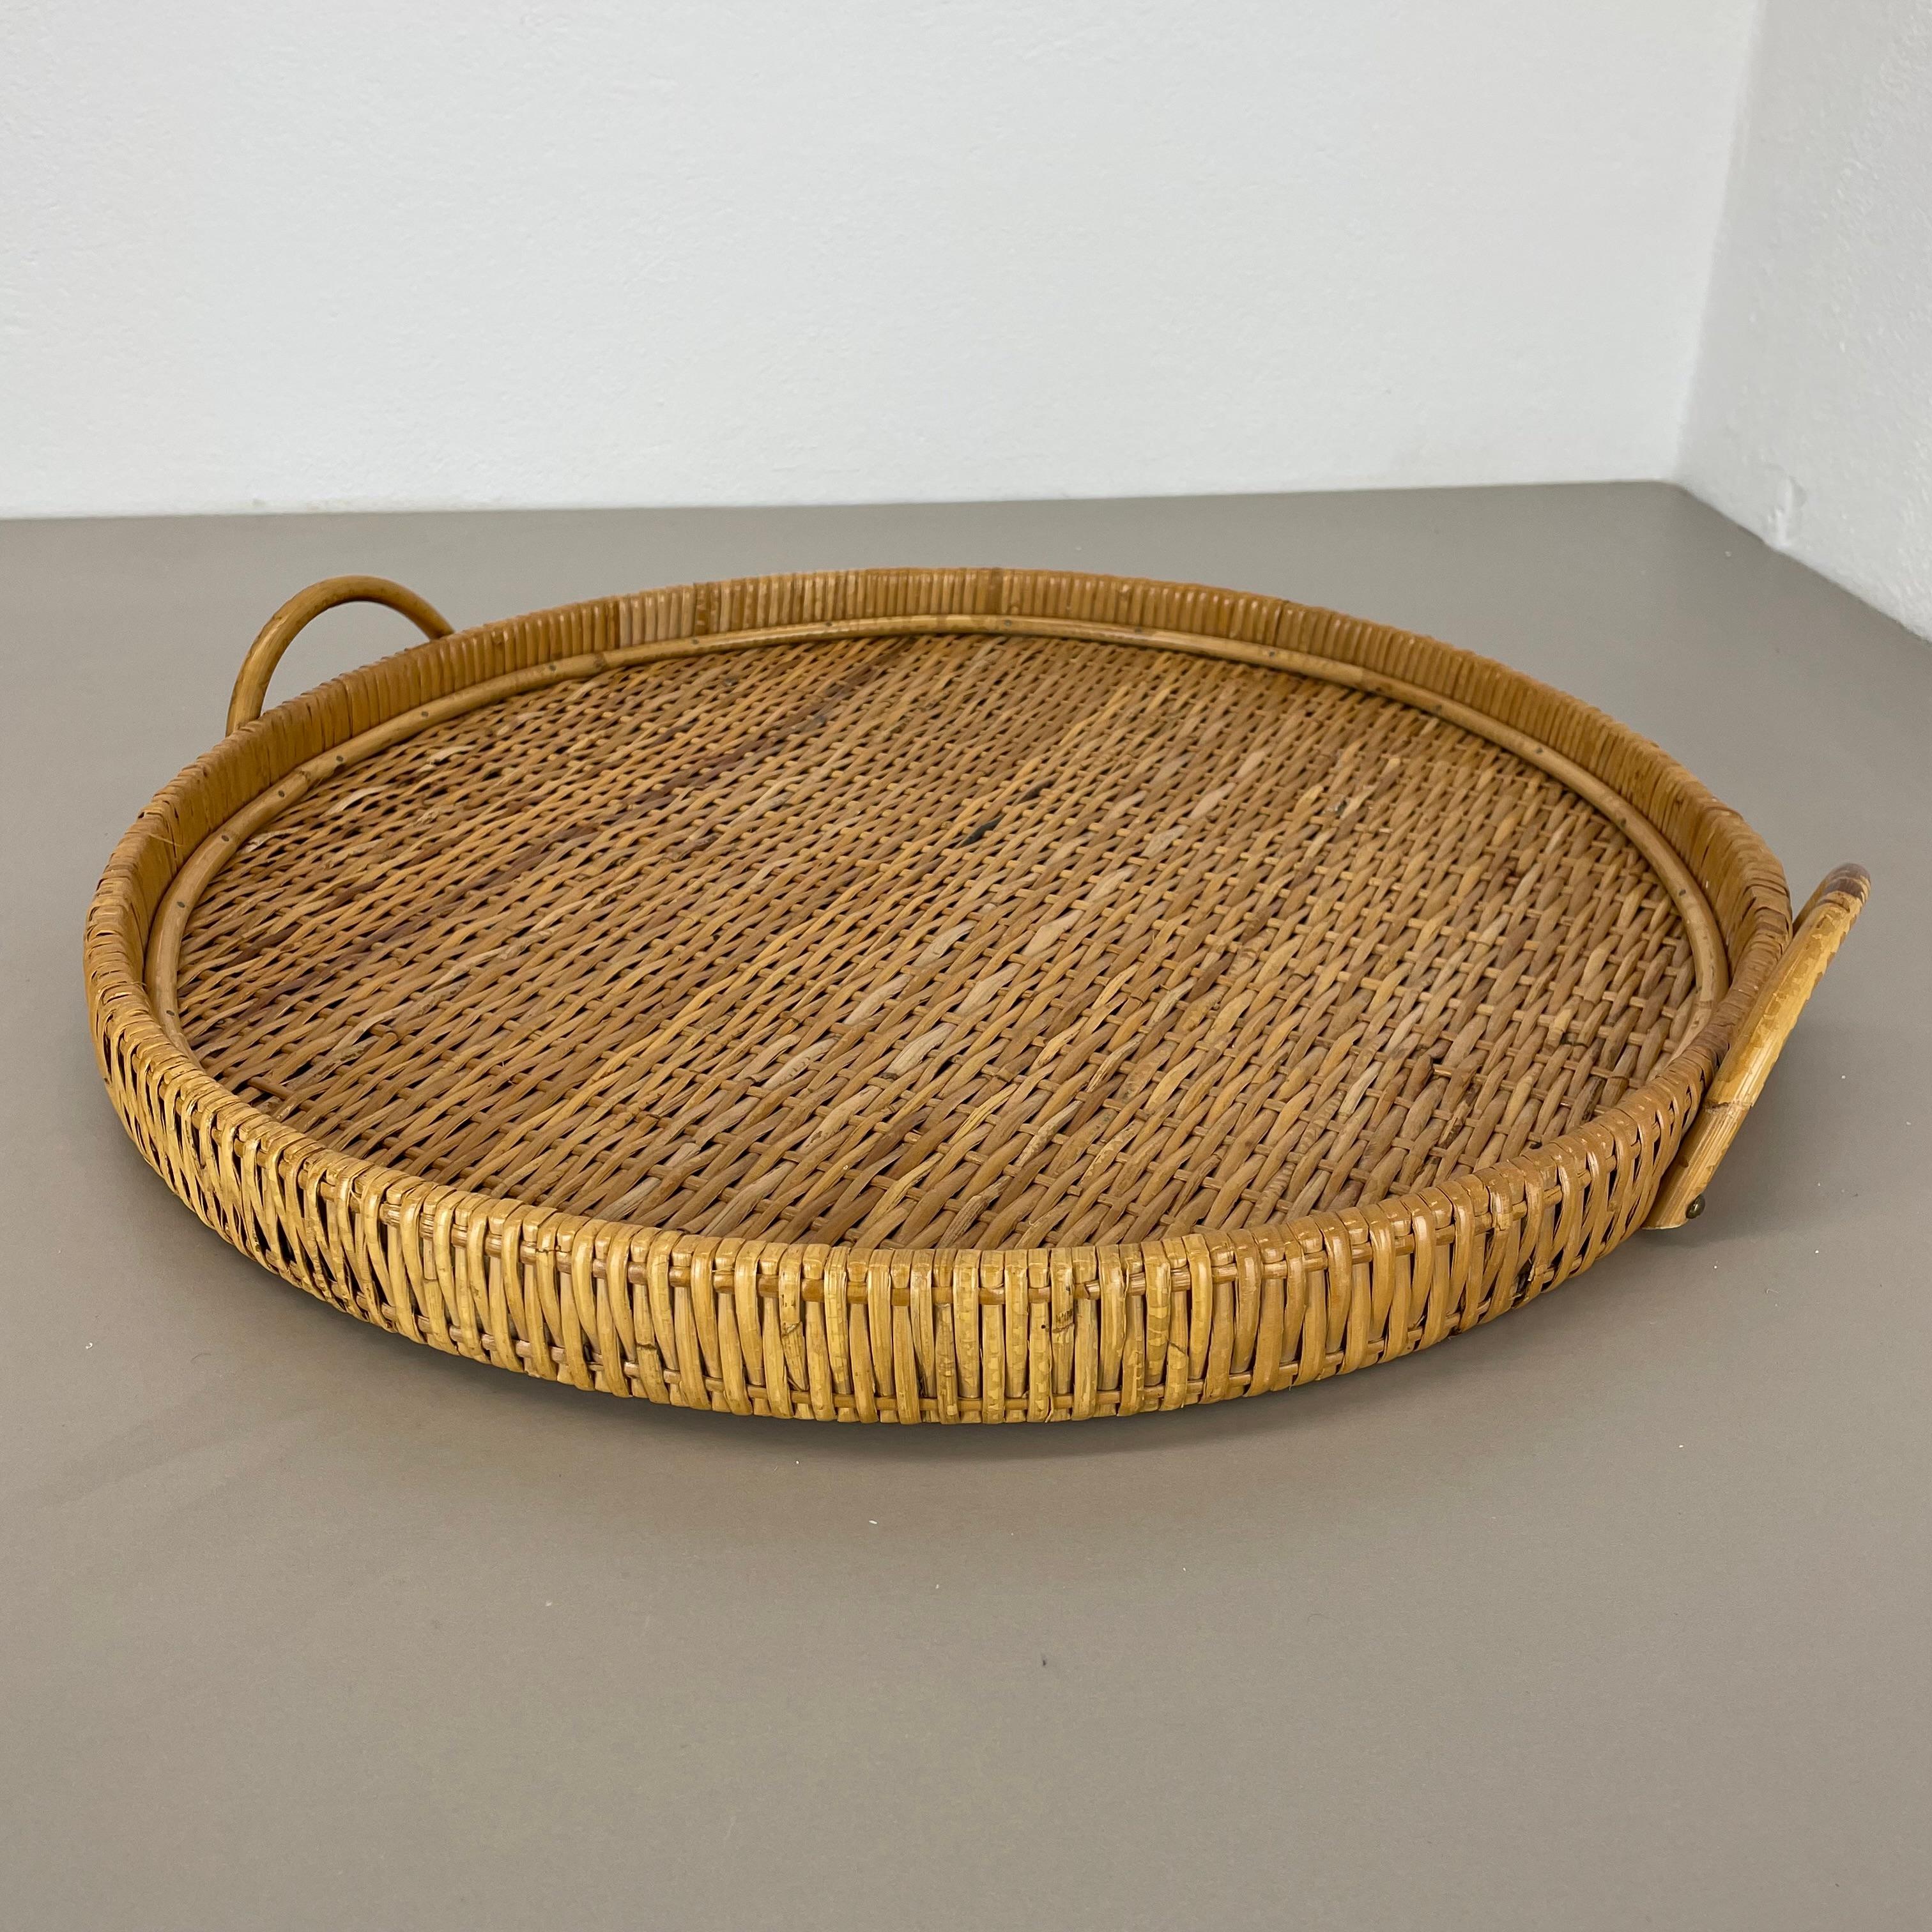 Article:

tray element


Origin:

Italy


Design:

In style of Franco Albini and Gabriella Crespi



Age:

1970s


Description:

This original vintage tray element was designed and produced in the 1970s by in Italy. the tray is made of rattan and